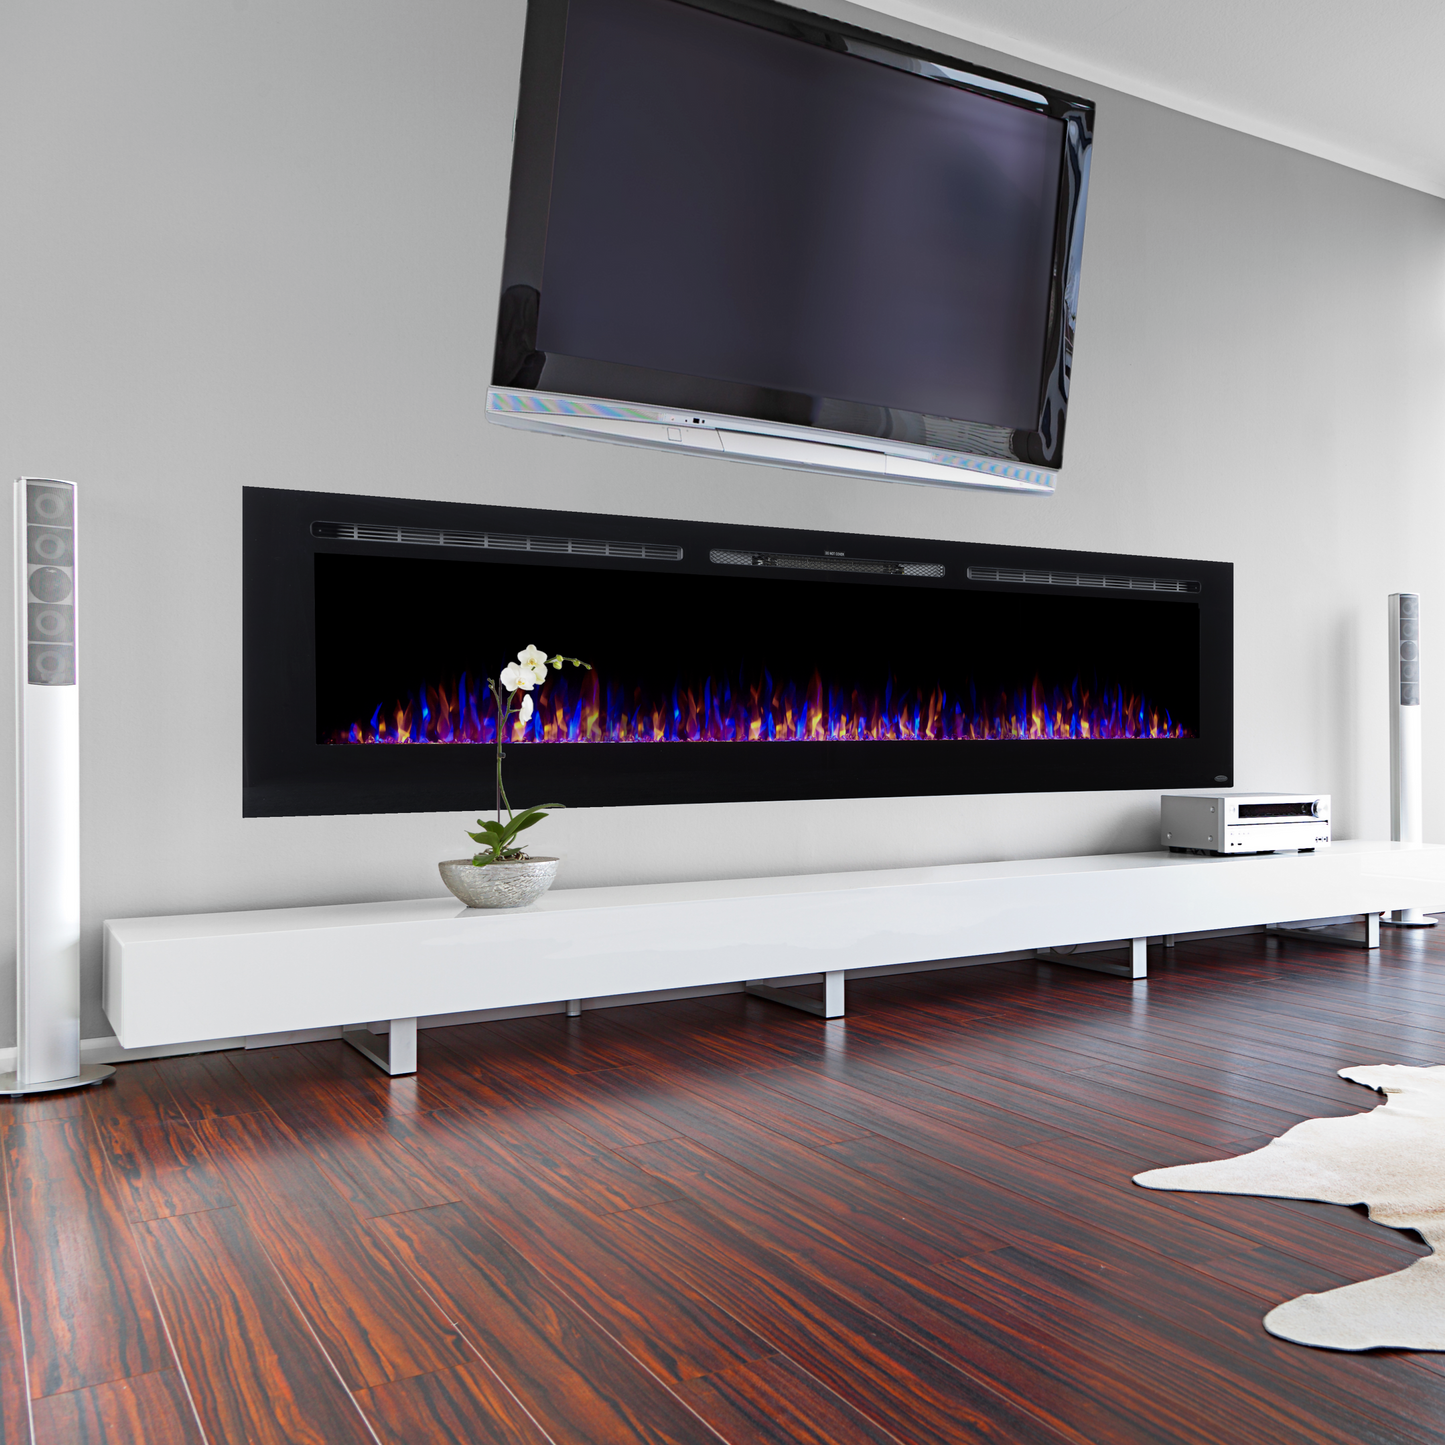 Wide and black modern built-in/wall mounted electric fireplace | Touchstone Sideline 100" Recessed Electric Fireplace